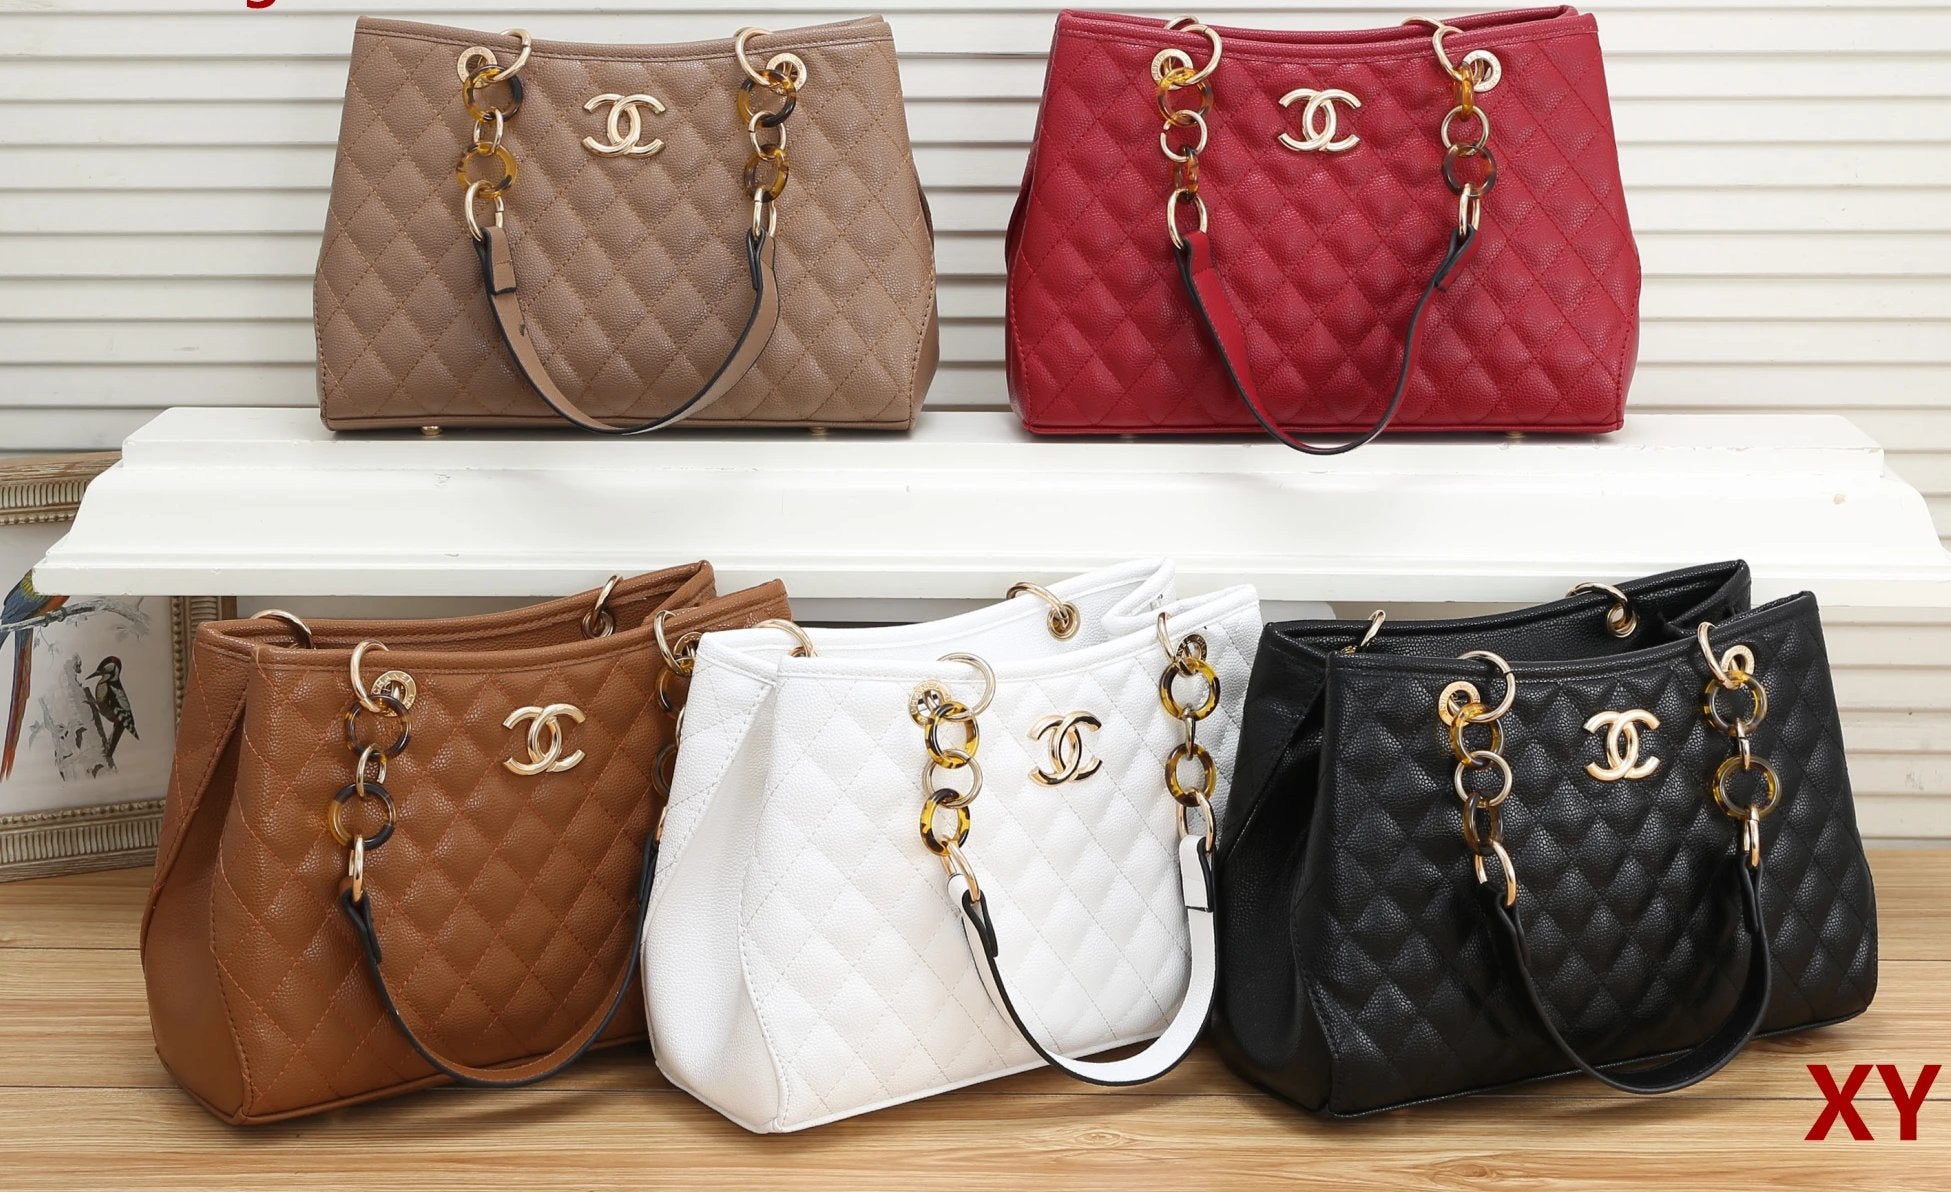 Petite Shopping Tote Chanel Bags - Vestiaire Collective